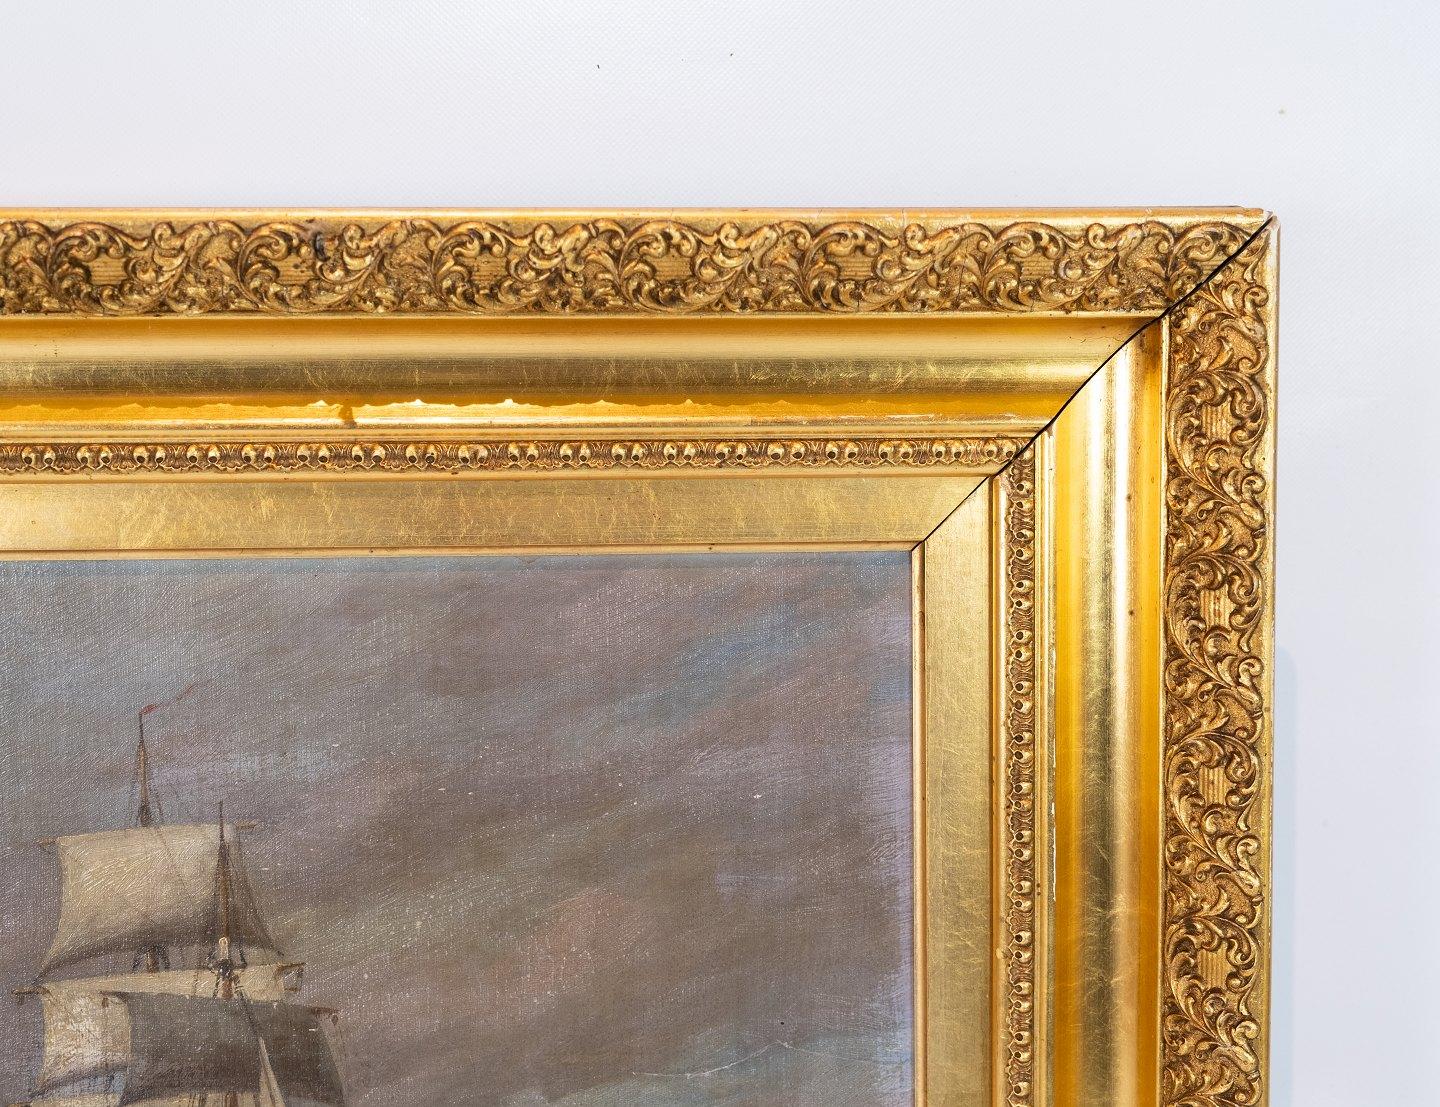 Oil painting with marine motif with gilded frame signed Carl Locher. The painting is in great vintage condition. Carl Locher was born in Flensburg in 1851 and died in Skagen in 1915.